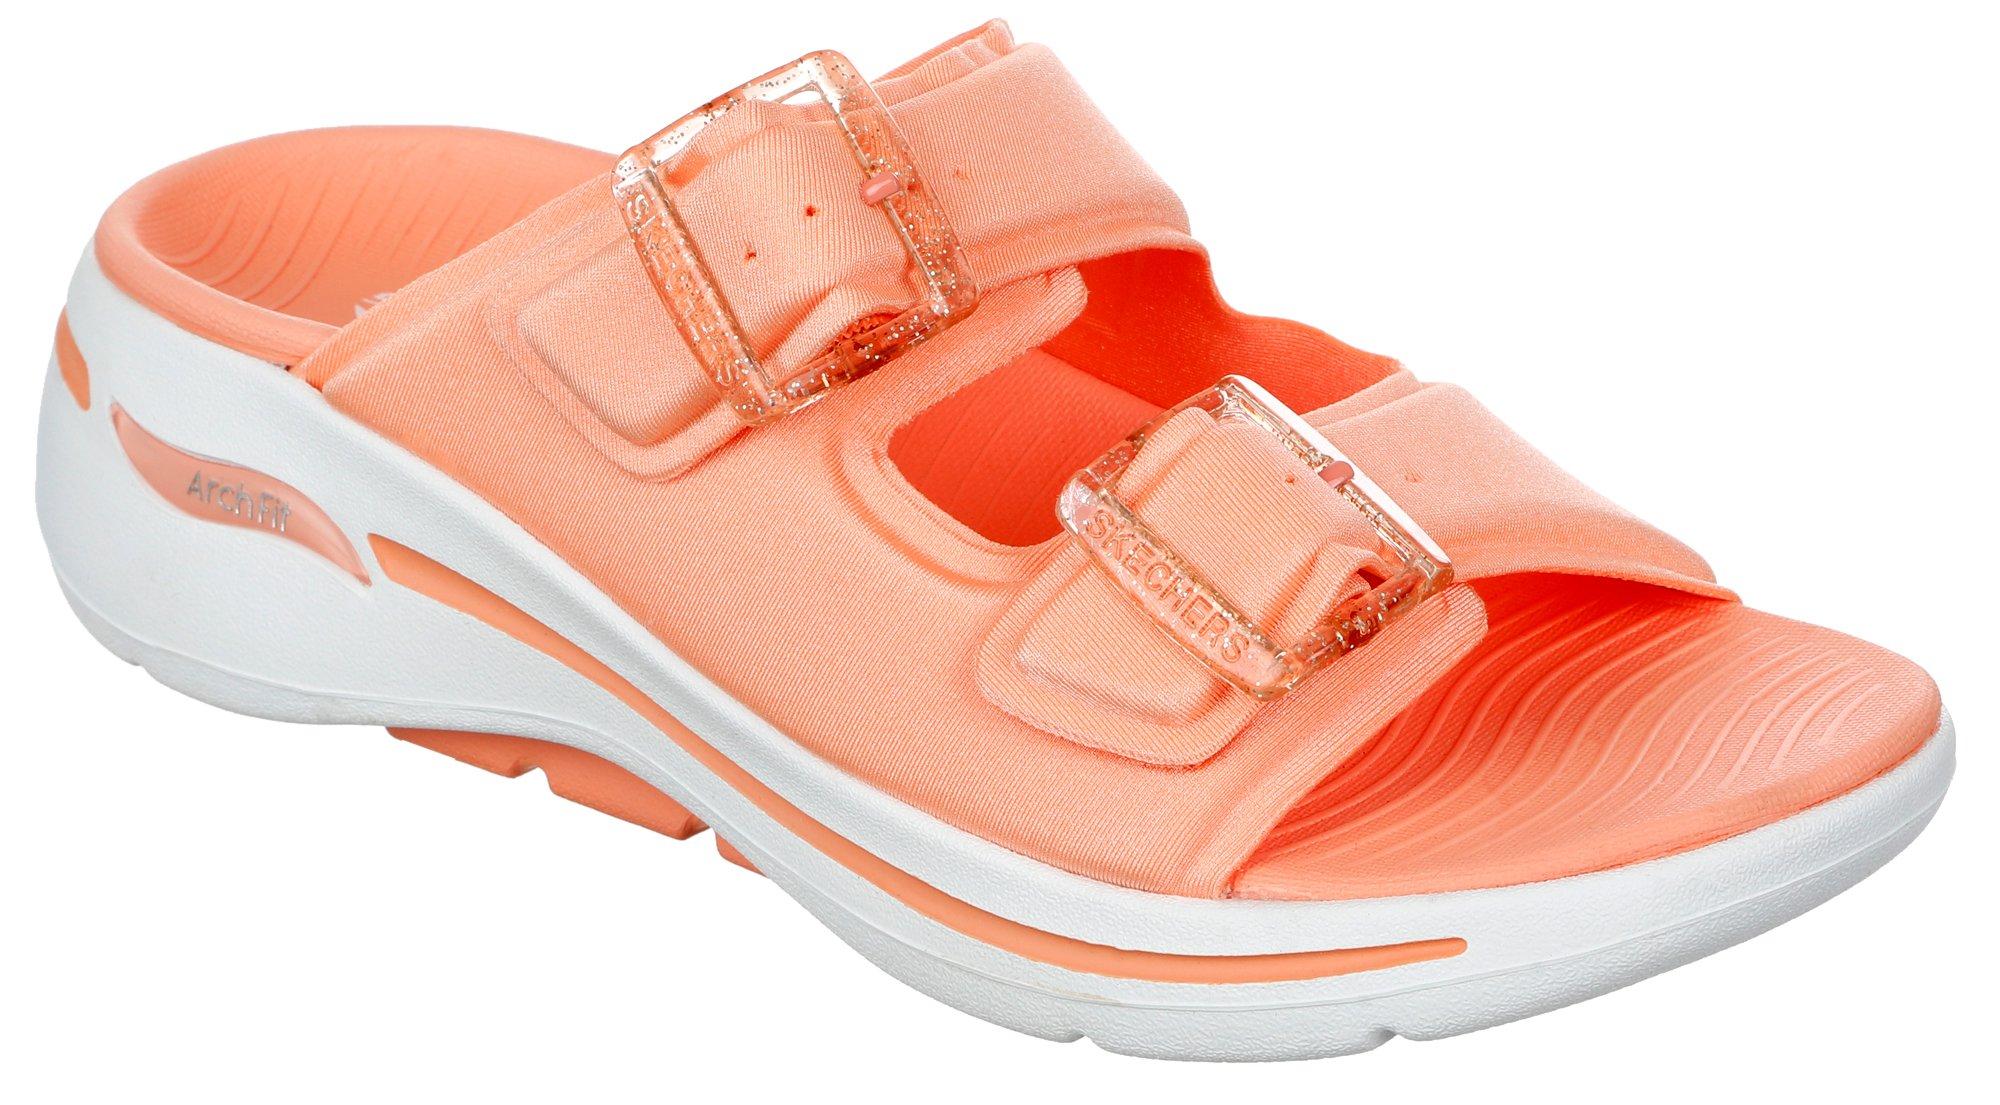 Women's Arch-Fit Double Band Sandals - Coral